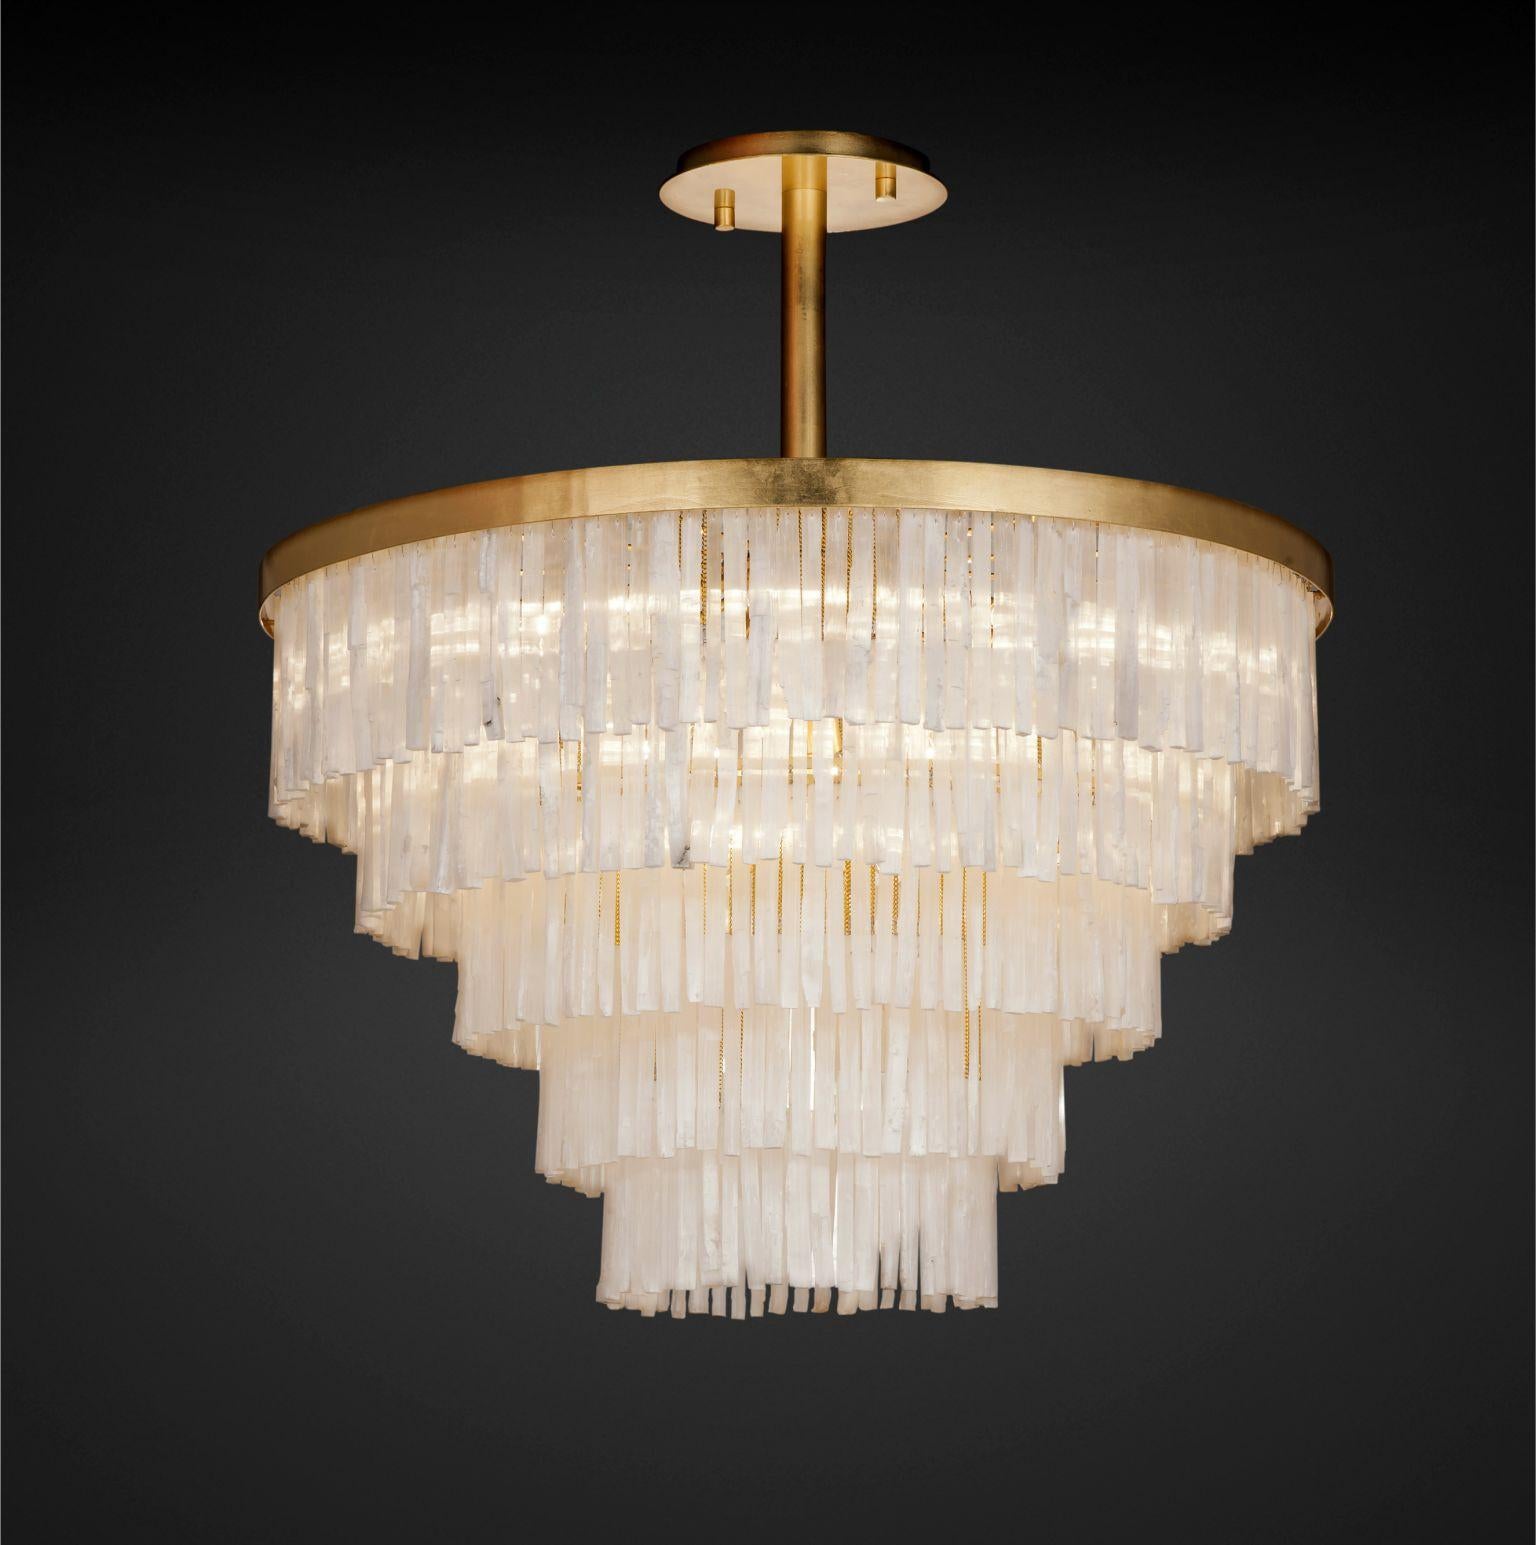 Selenite chandelier 120 by Aver.
Dimensions: D 120 x H 80 cm.
Materials: Selenite, metal.
Available in other sizes.

Designed by Marcele Muraro, for Aver, the collection is produced with natural Moroccan selenite and inspired by the city of